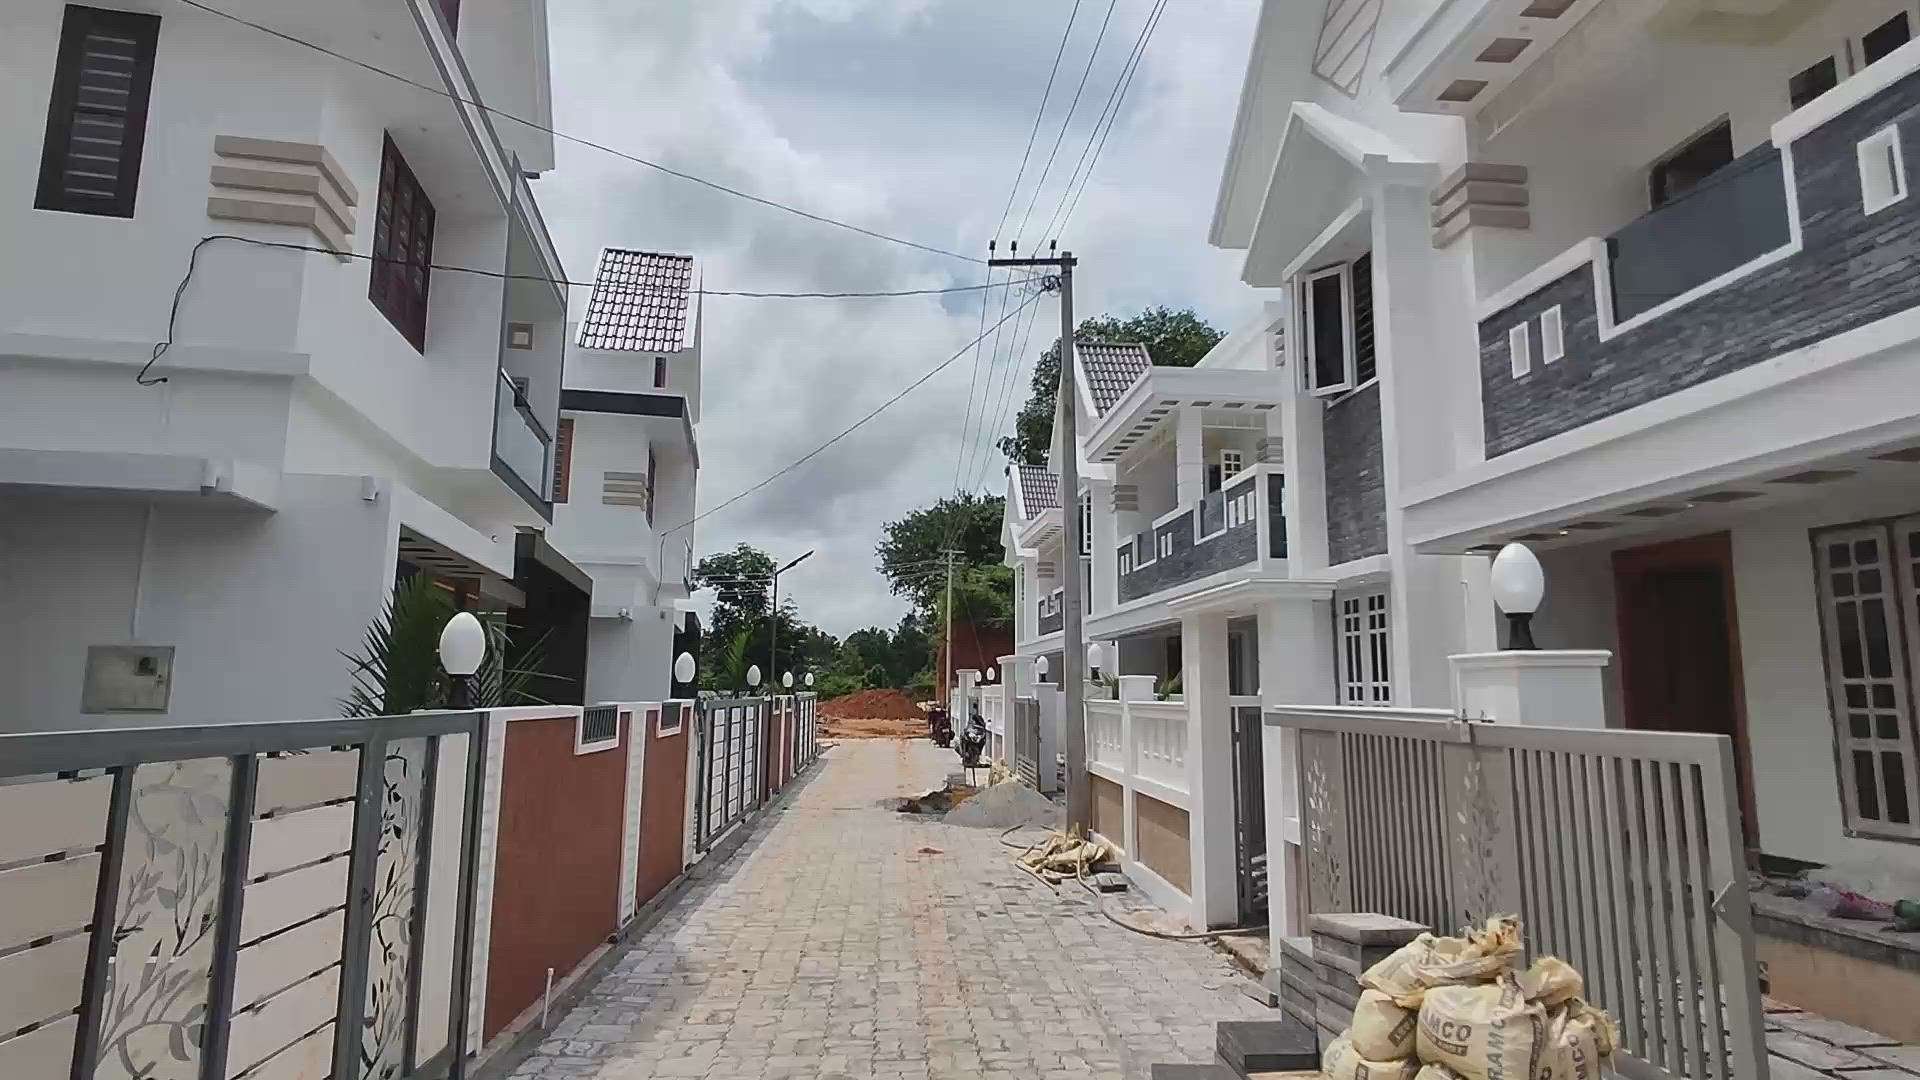 New villa for sale in Kakkanad, 4.5 cent, 2000 sq ft, 4 bhk, 78 lakhs
contact us 9400986063
for full video visit our YouTube channel valiyaparambil properties